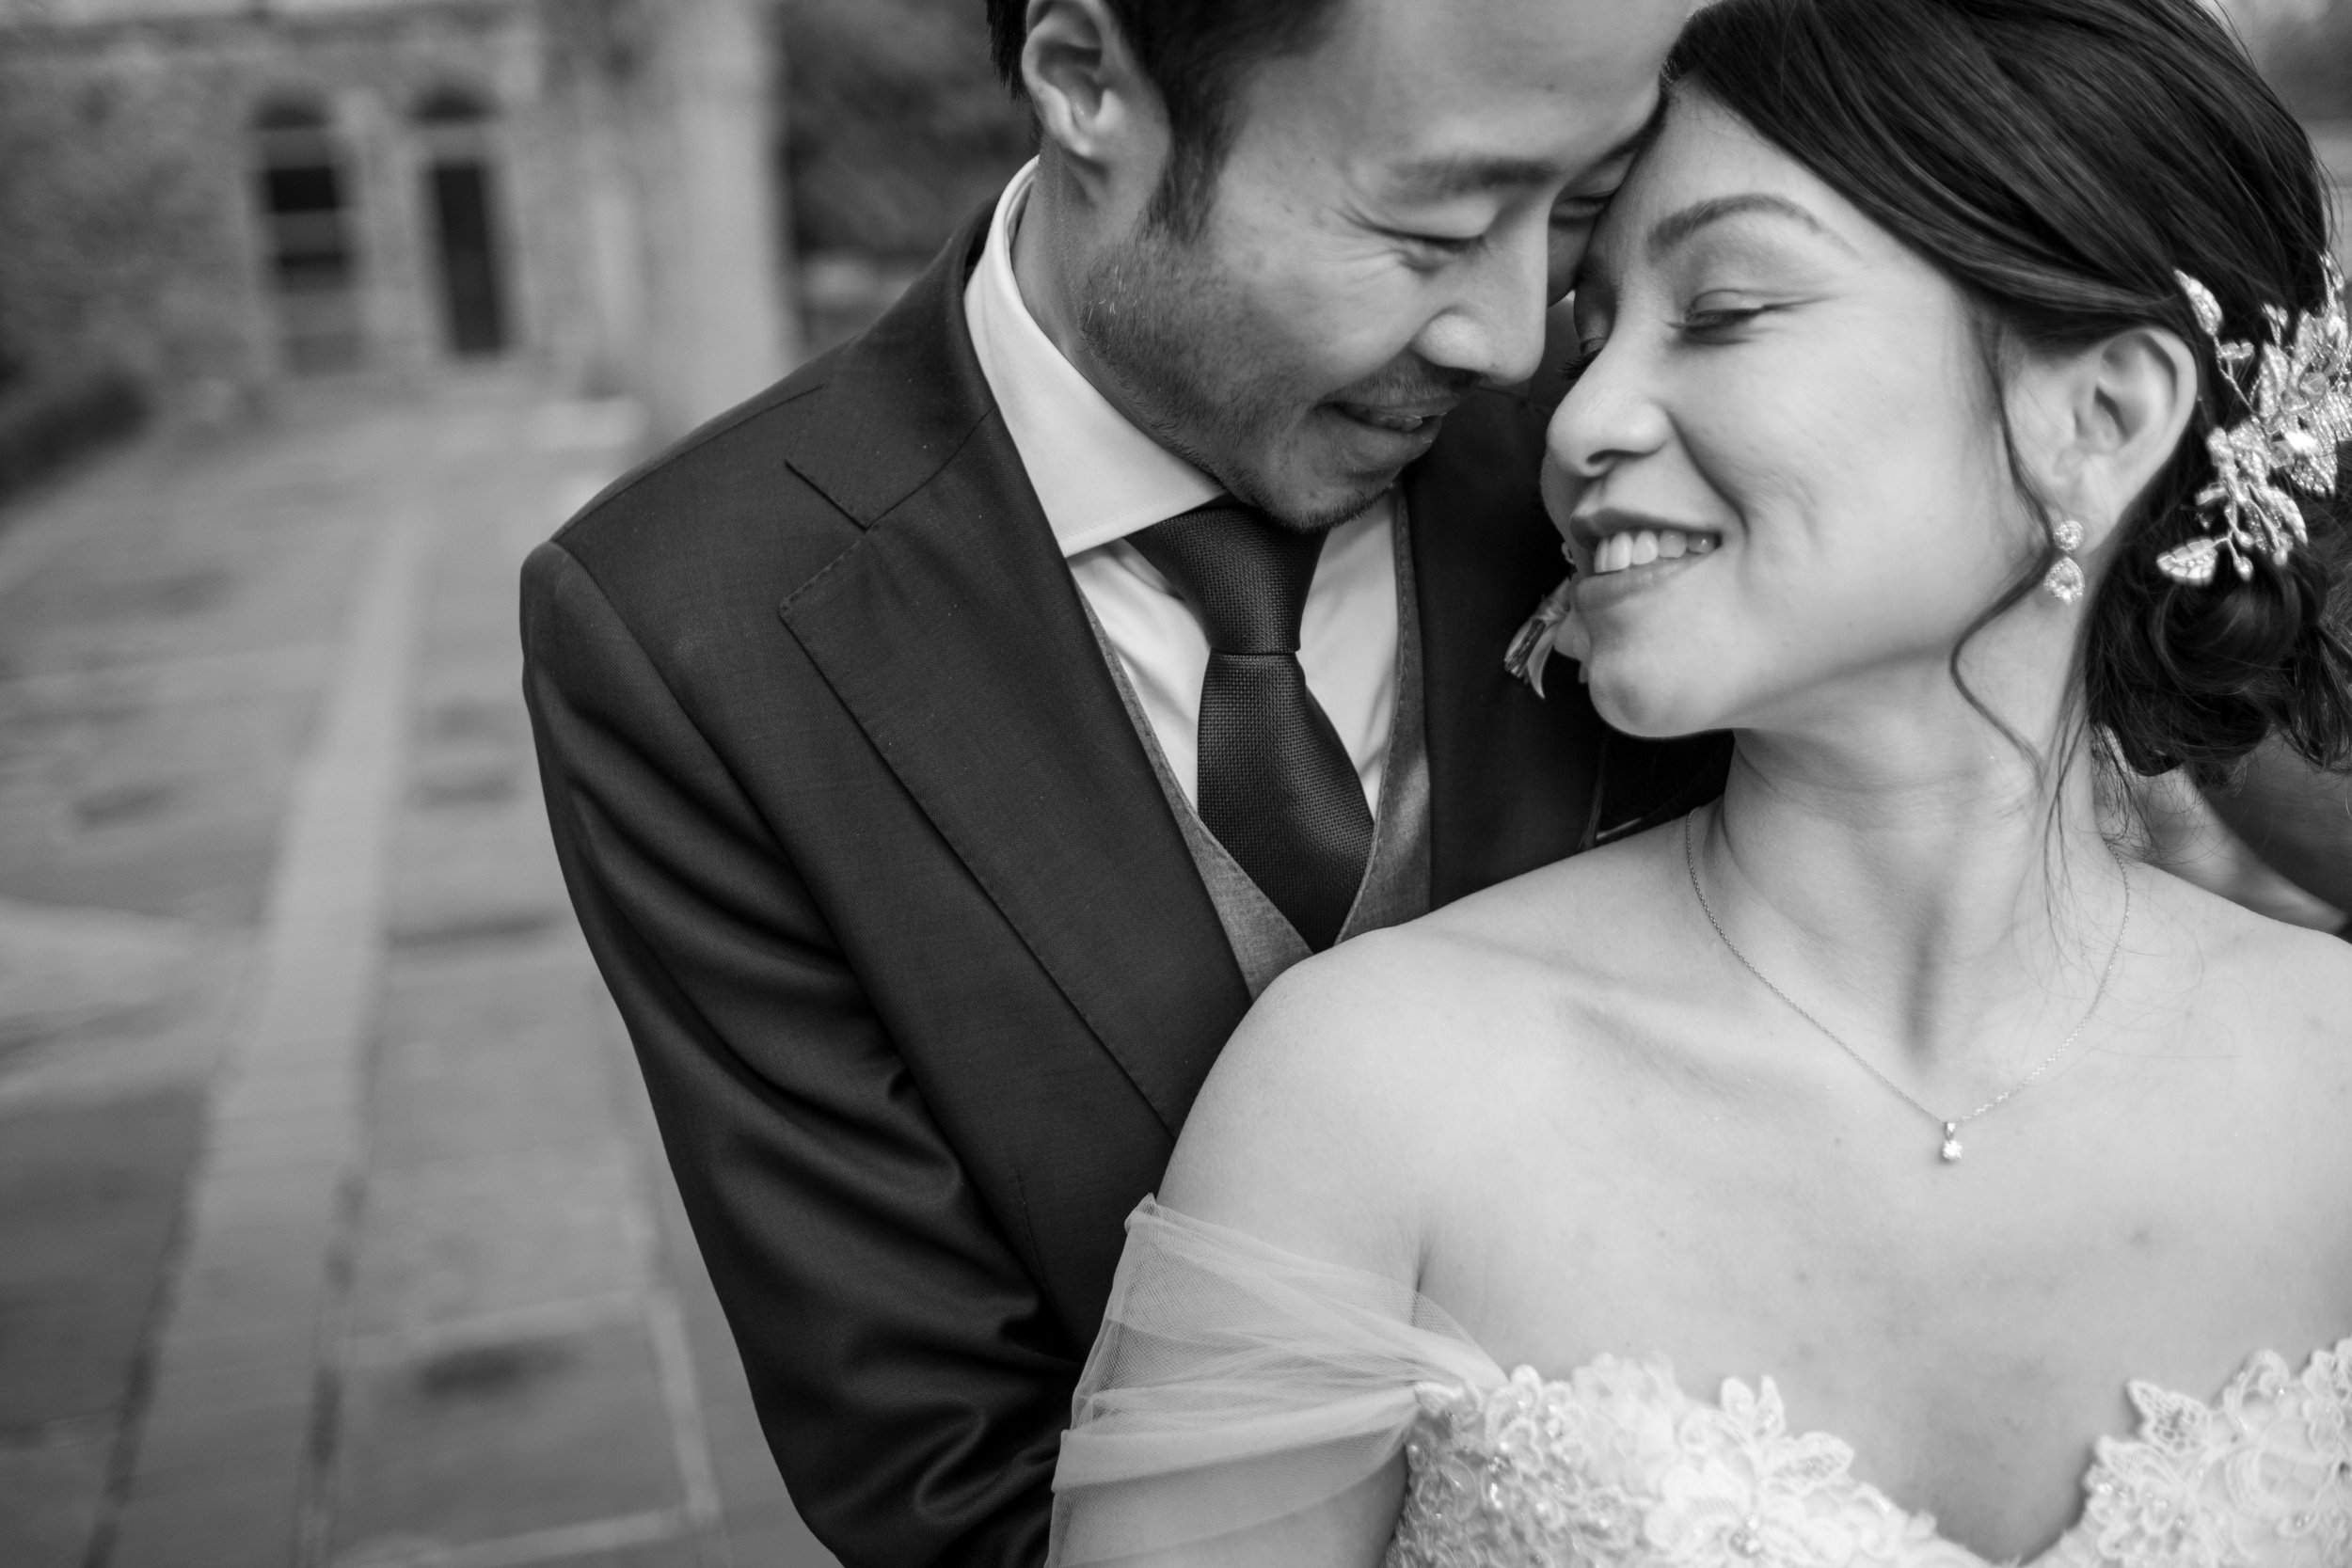  A black and white wedding portrait of Jennifer and Jarvis before their wedding reception later at Graydon Hall in Toronto, Ontario.  Photograph by Toronto Wedding Photographer Scott Williams.  